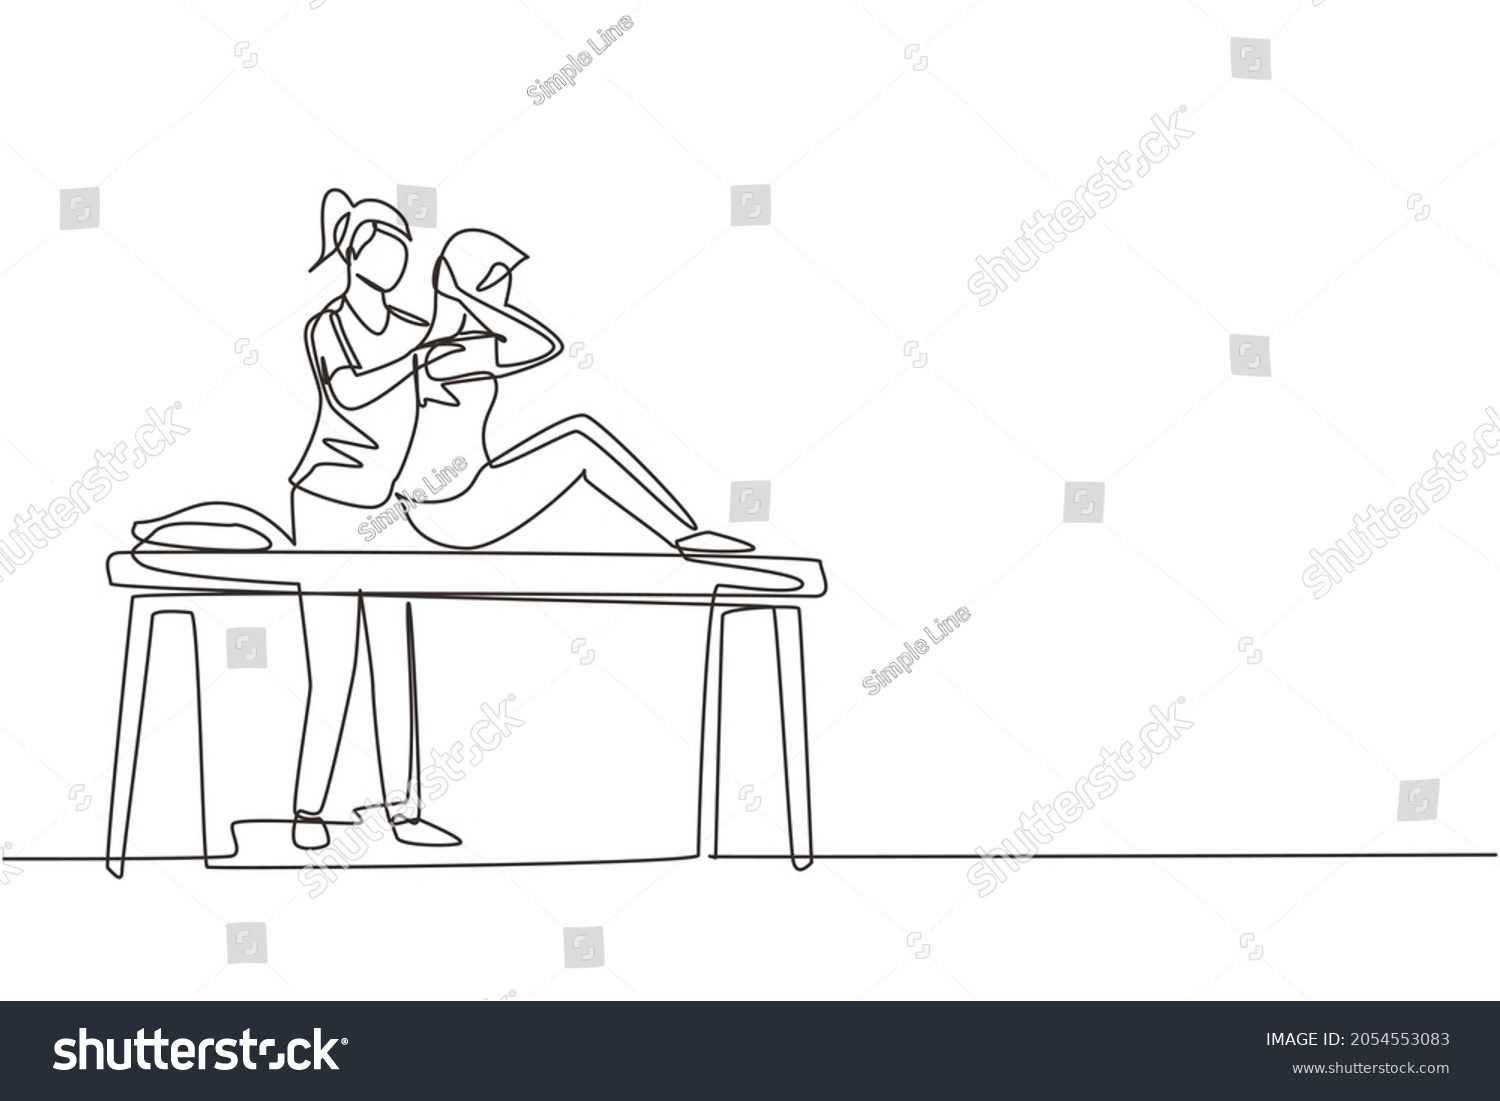 SVG of Single one line drawing woman sitting on massage table masseur doing healing treatment massaging injured patient manual physical therapy rehabilitation. Continuous line draw design vector illustration svg